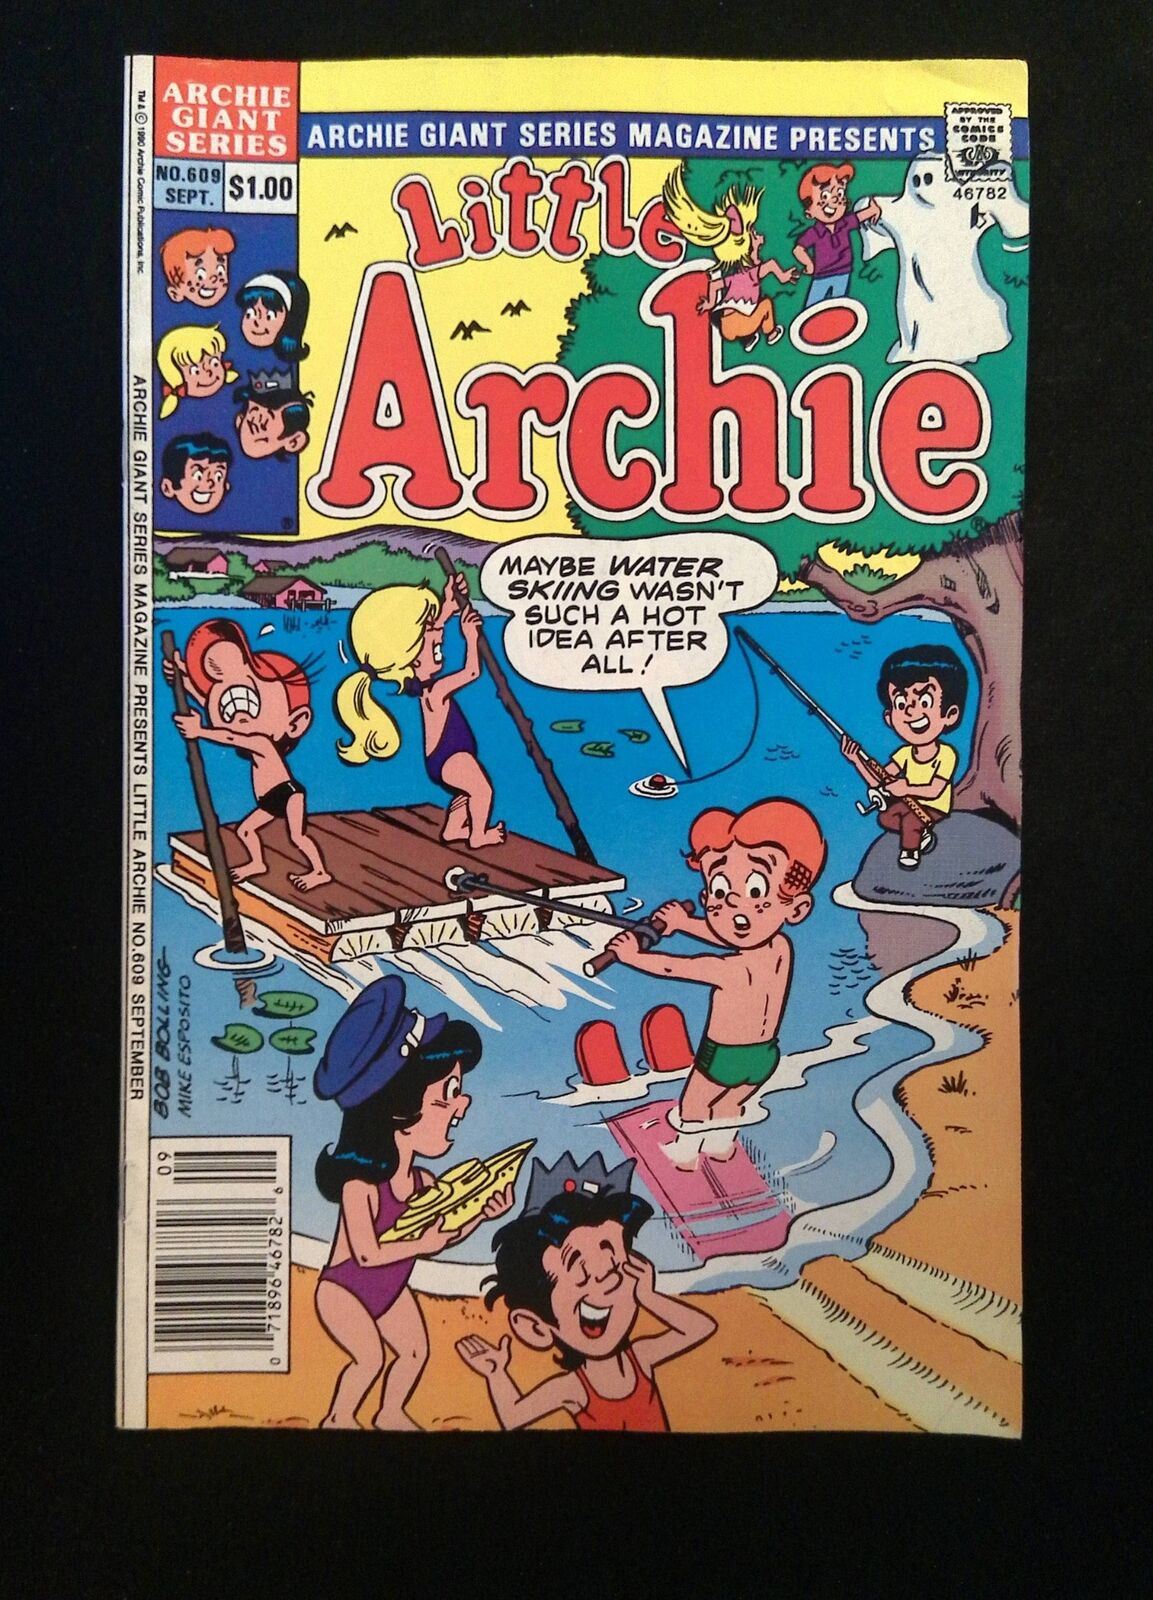 Archie Giant Series #609  ARCHIE Comics 1990 FN NEWSSTAND